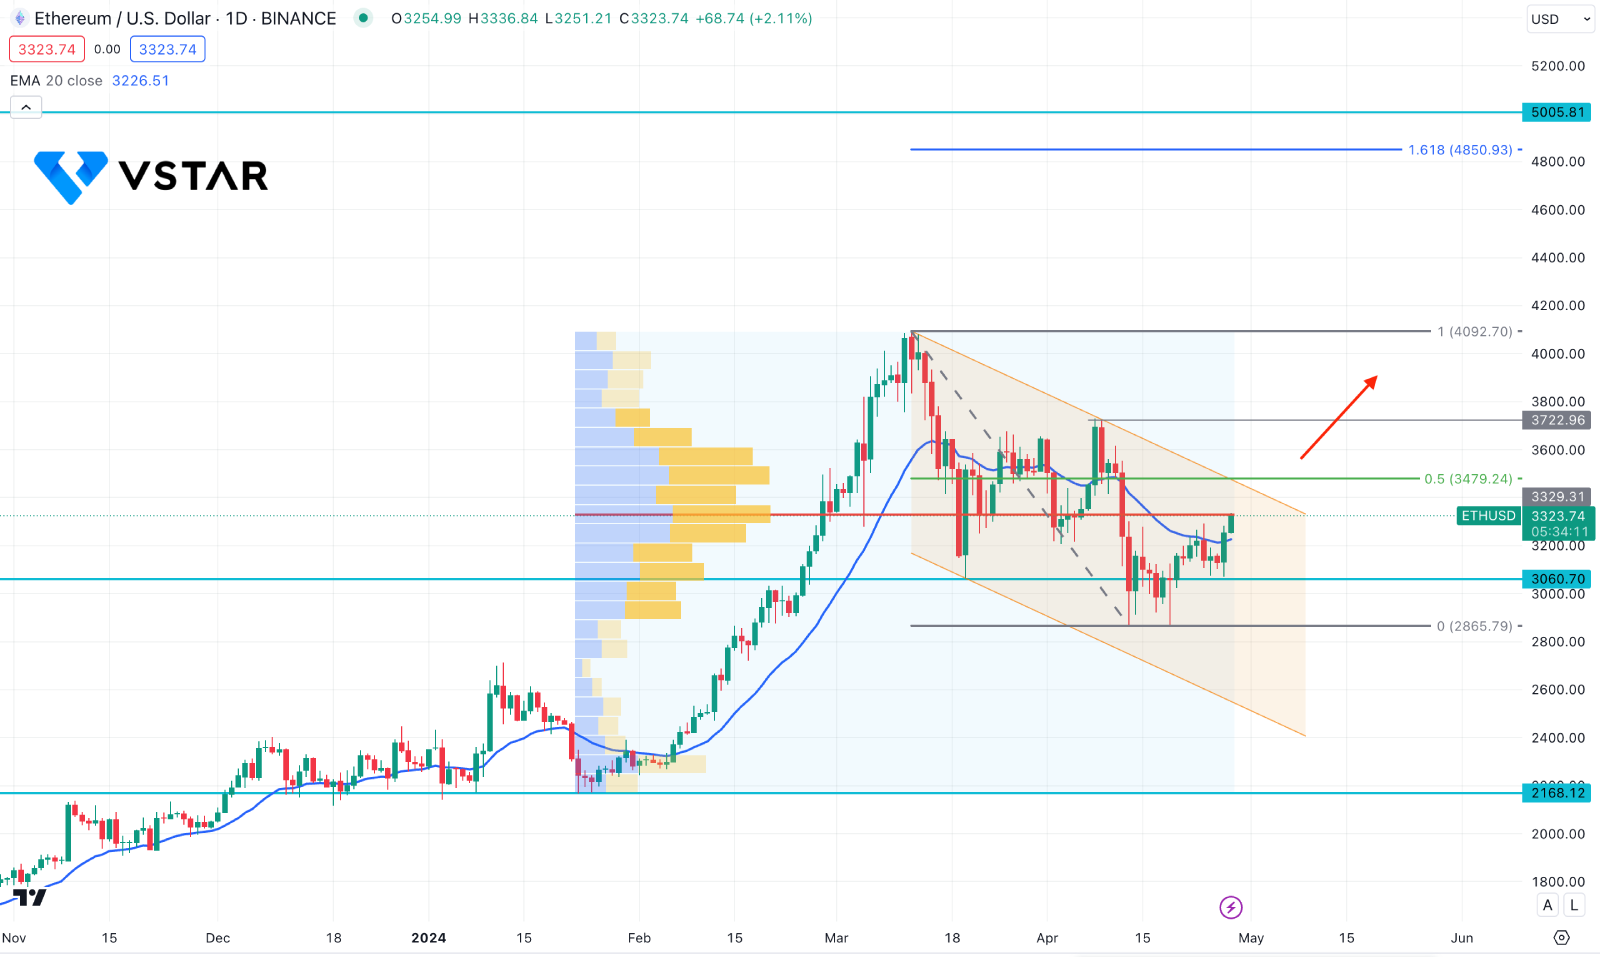 Ethereum Price (ETHUSD) Aimed To Reach The $5000.00 Psychological Line